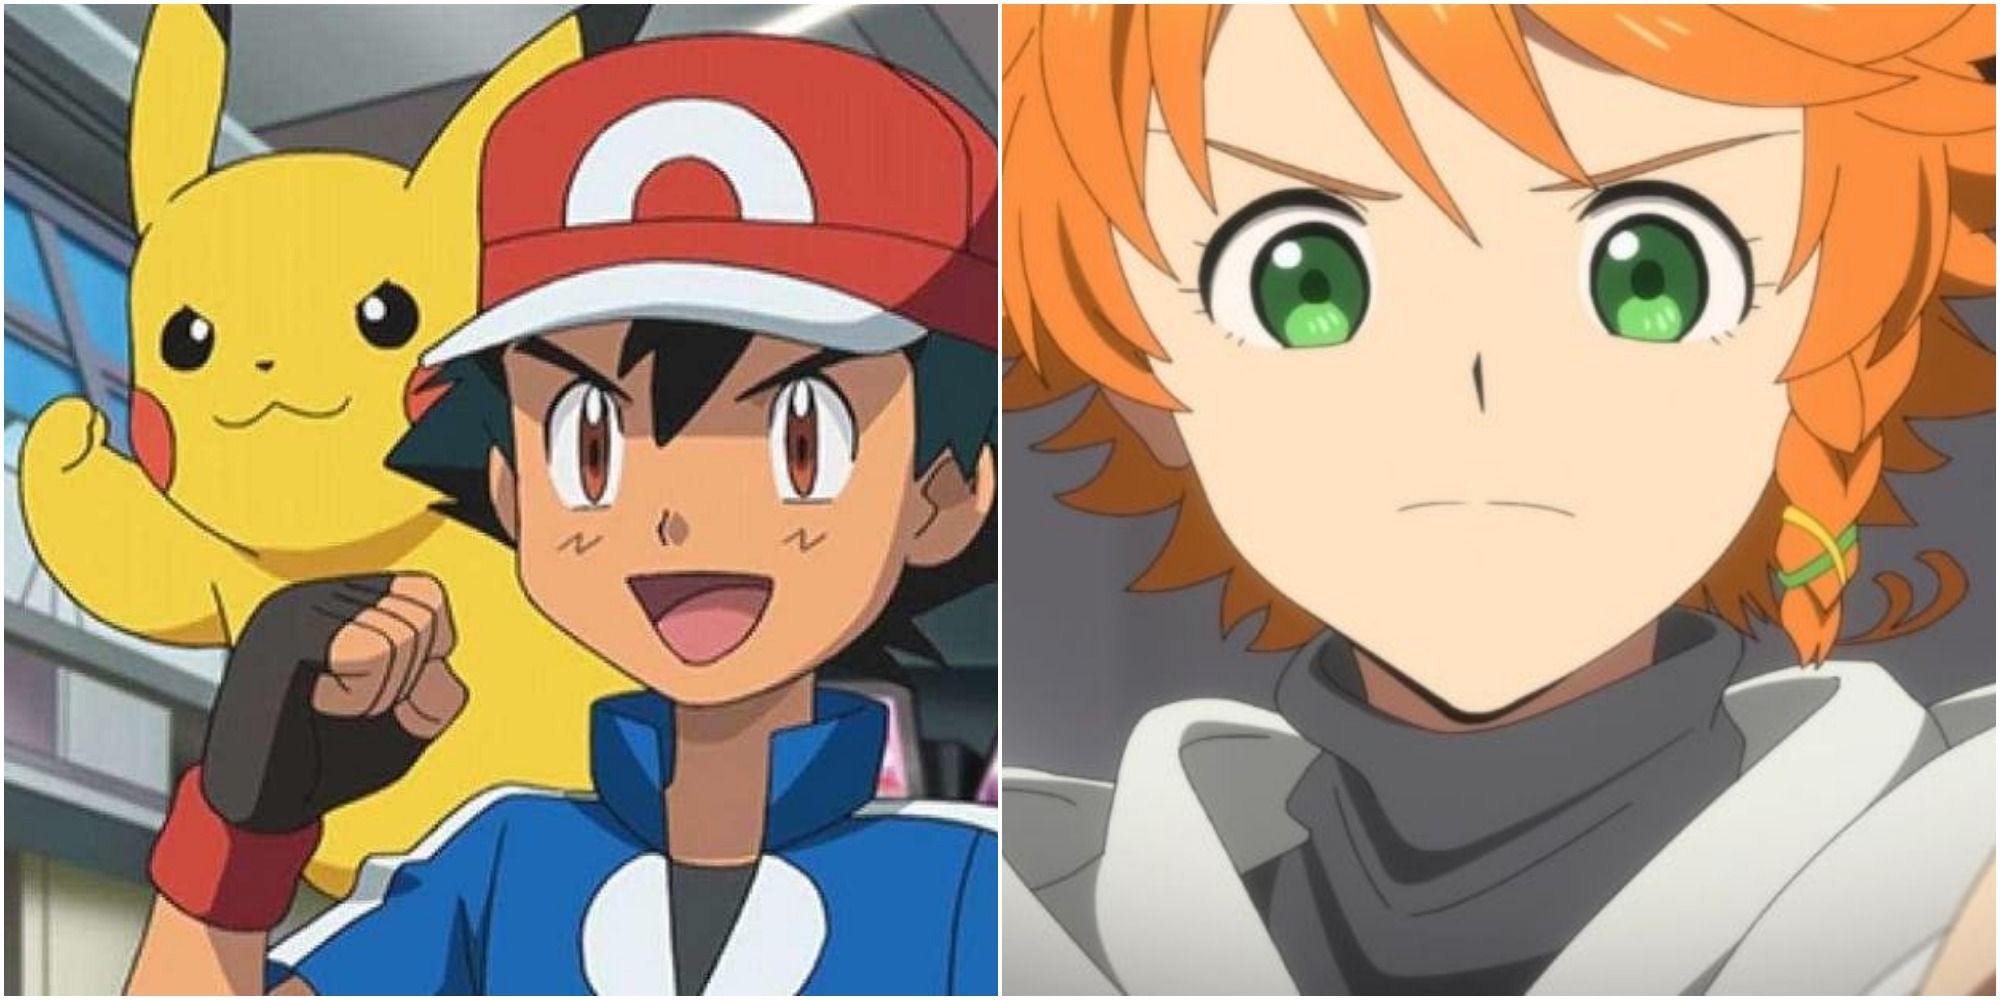 10 Youngest Anime Protagonists Of All Time Ranked By Age